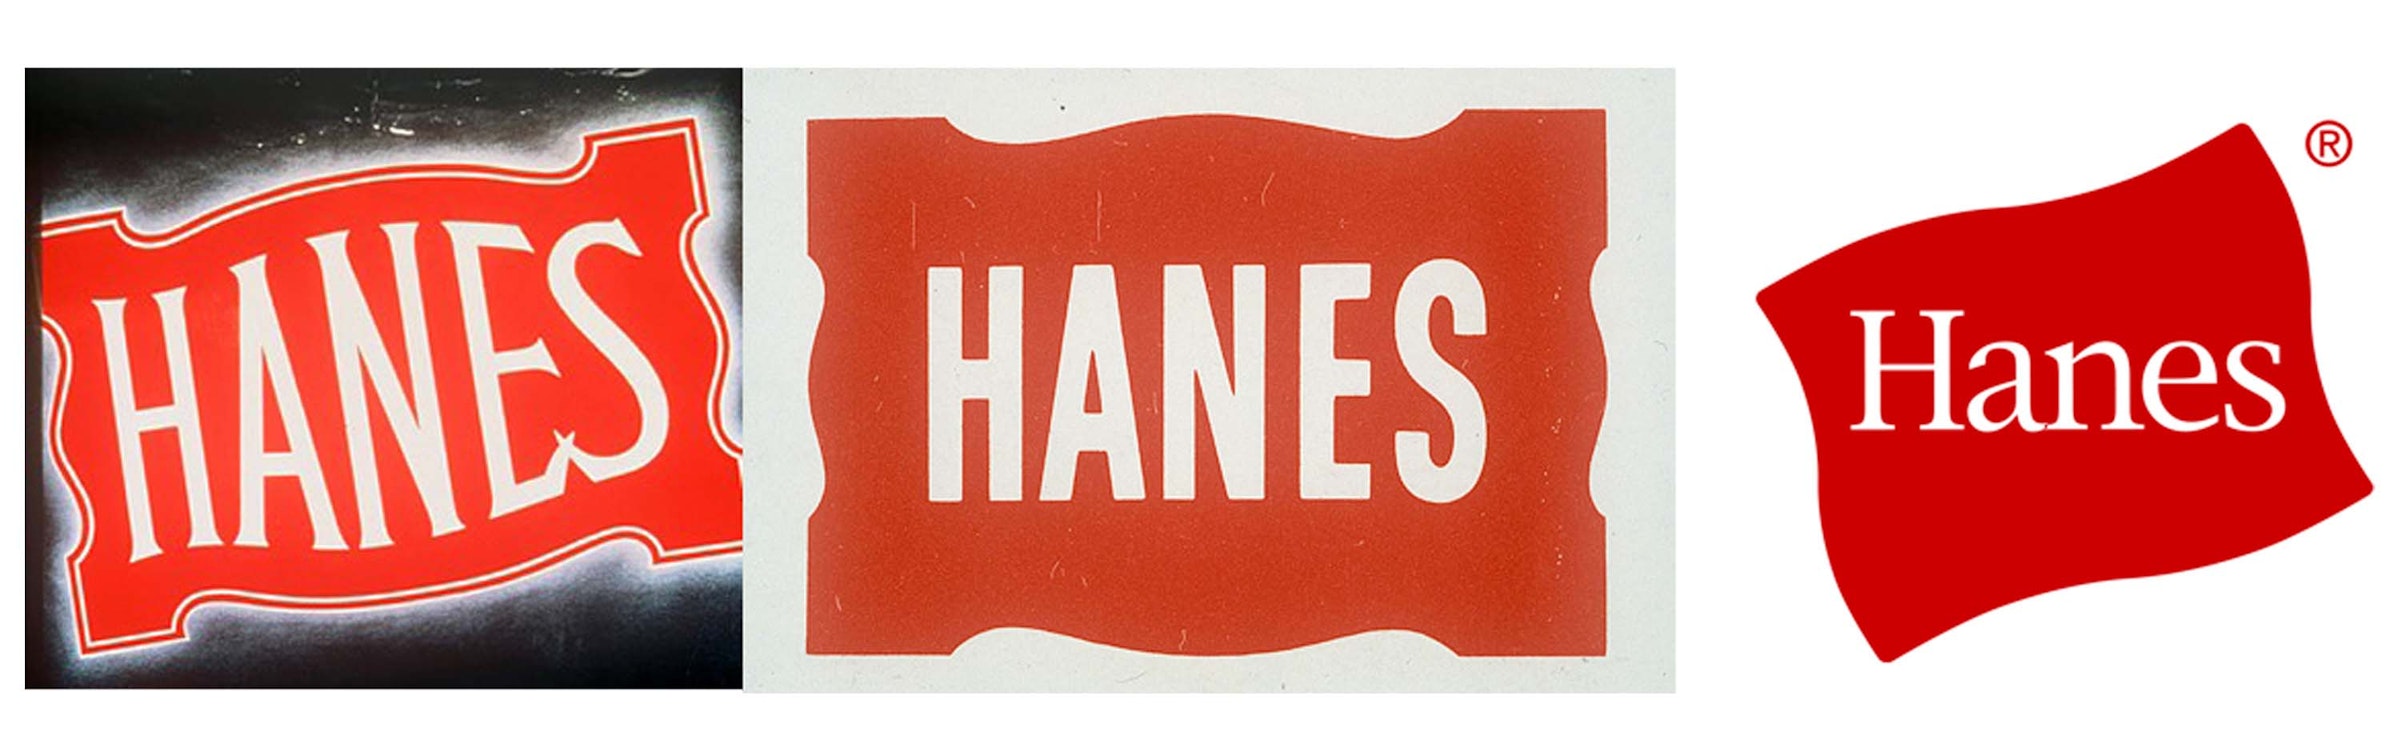 Left-hand side: Hanes logos from 1924, 1950, and the current version